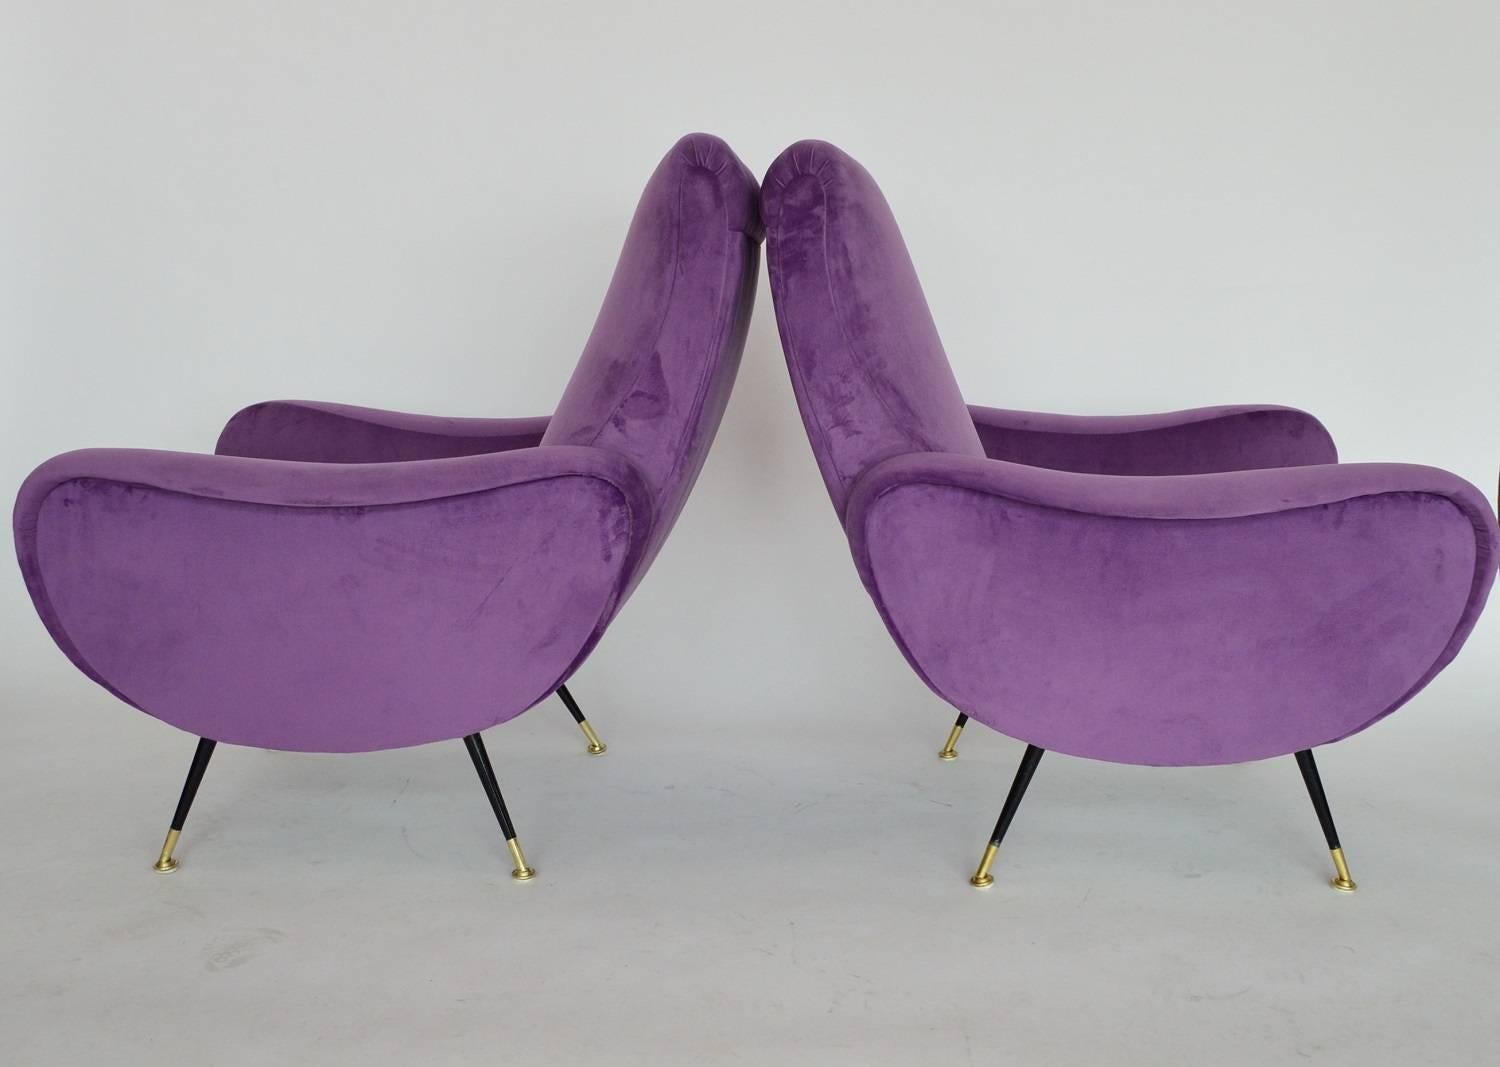 Amazing and comfortable pair of Italian original armchairs from the 1950s.
Completely restored internally with quality material and outside reupholstered with light violet (or lilac) soft Italian velvet.
The stiletto feet are original with brass